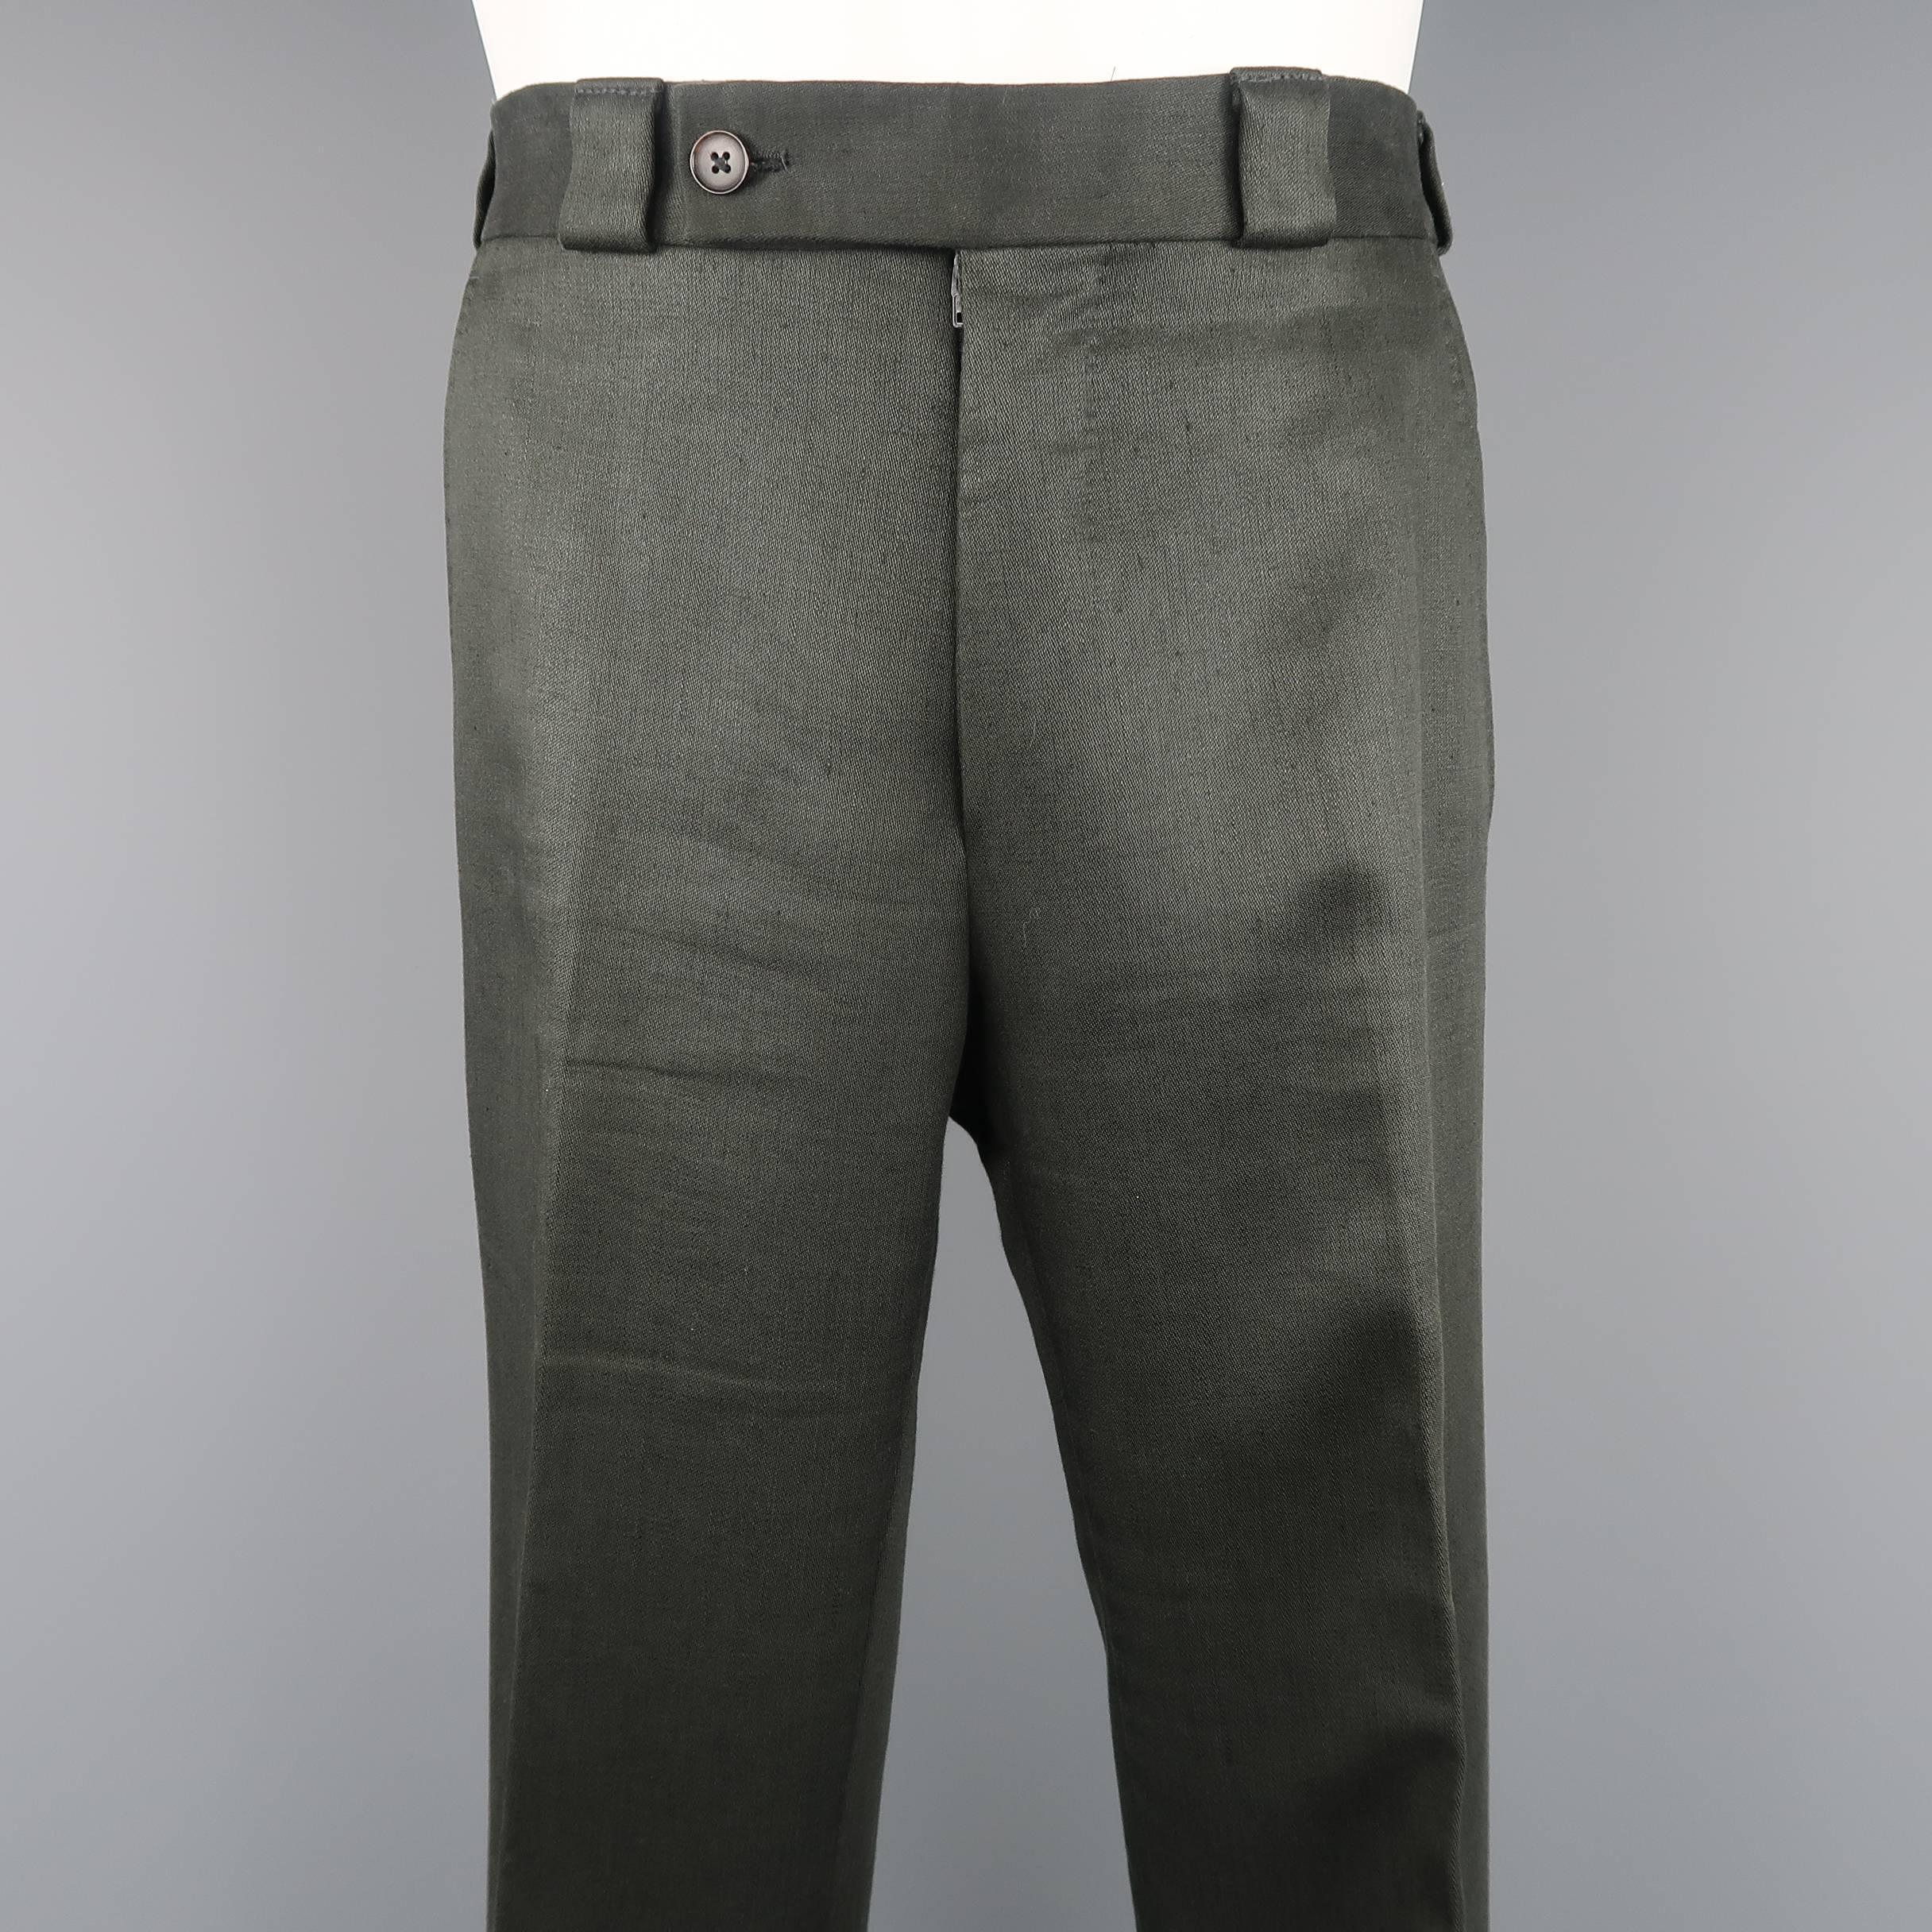 TOM FORD dress pants come in a thick linen material with a button tab waistband, zip, fly, and flat front leg. Wear throughout. Made in Italy.
 
Fair Pre-Owned Condition.
Marked: IT 46 R
 
Measurements:
 
Waist: 32 in. (+2 in.)
Rise: 10 in.
Inseam: